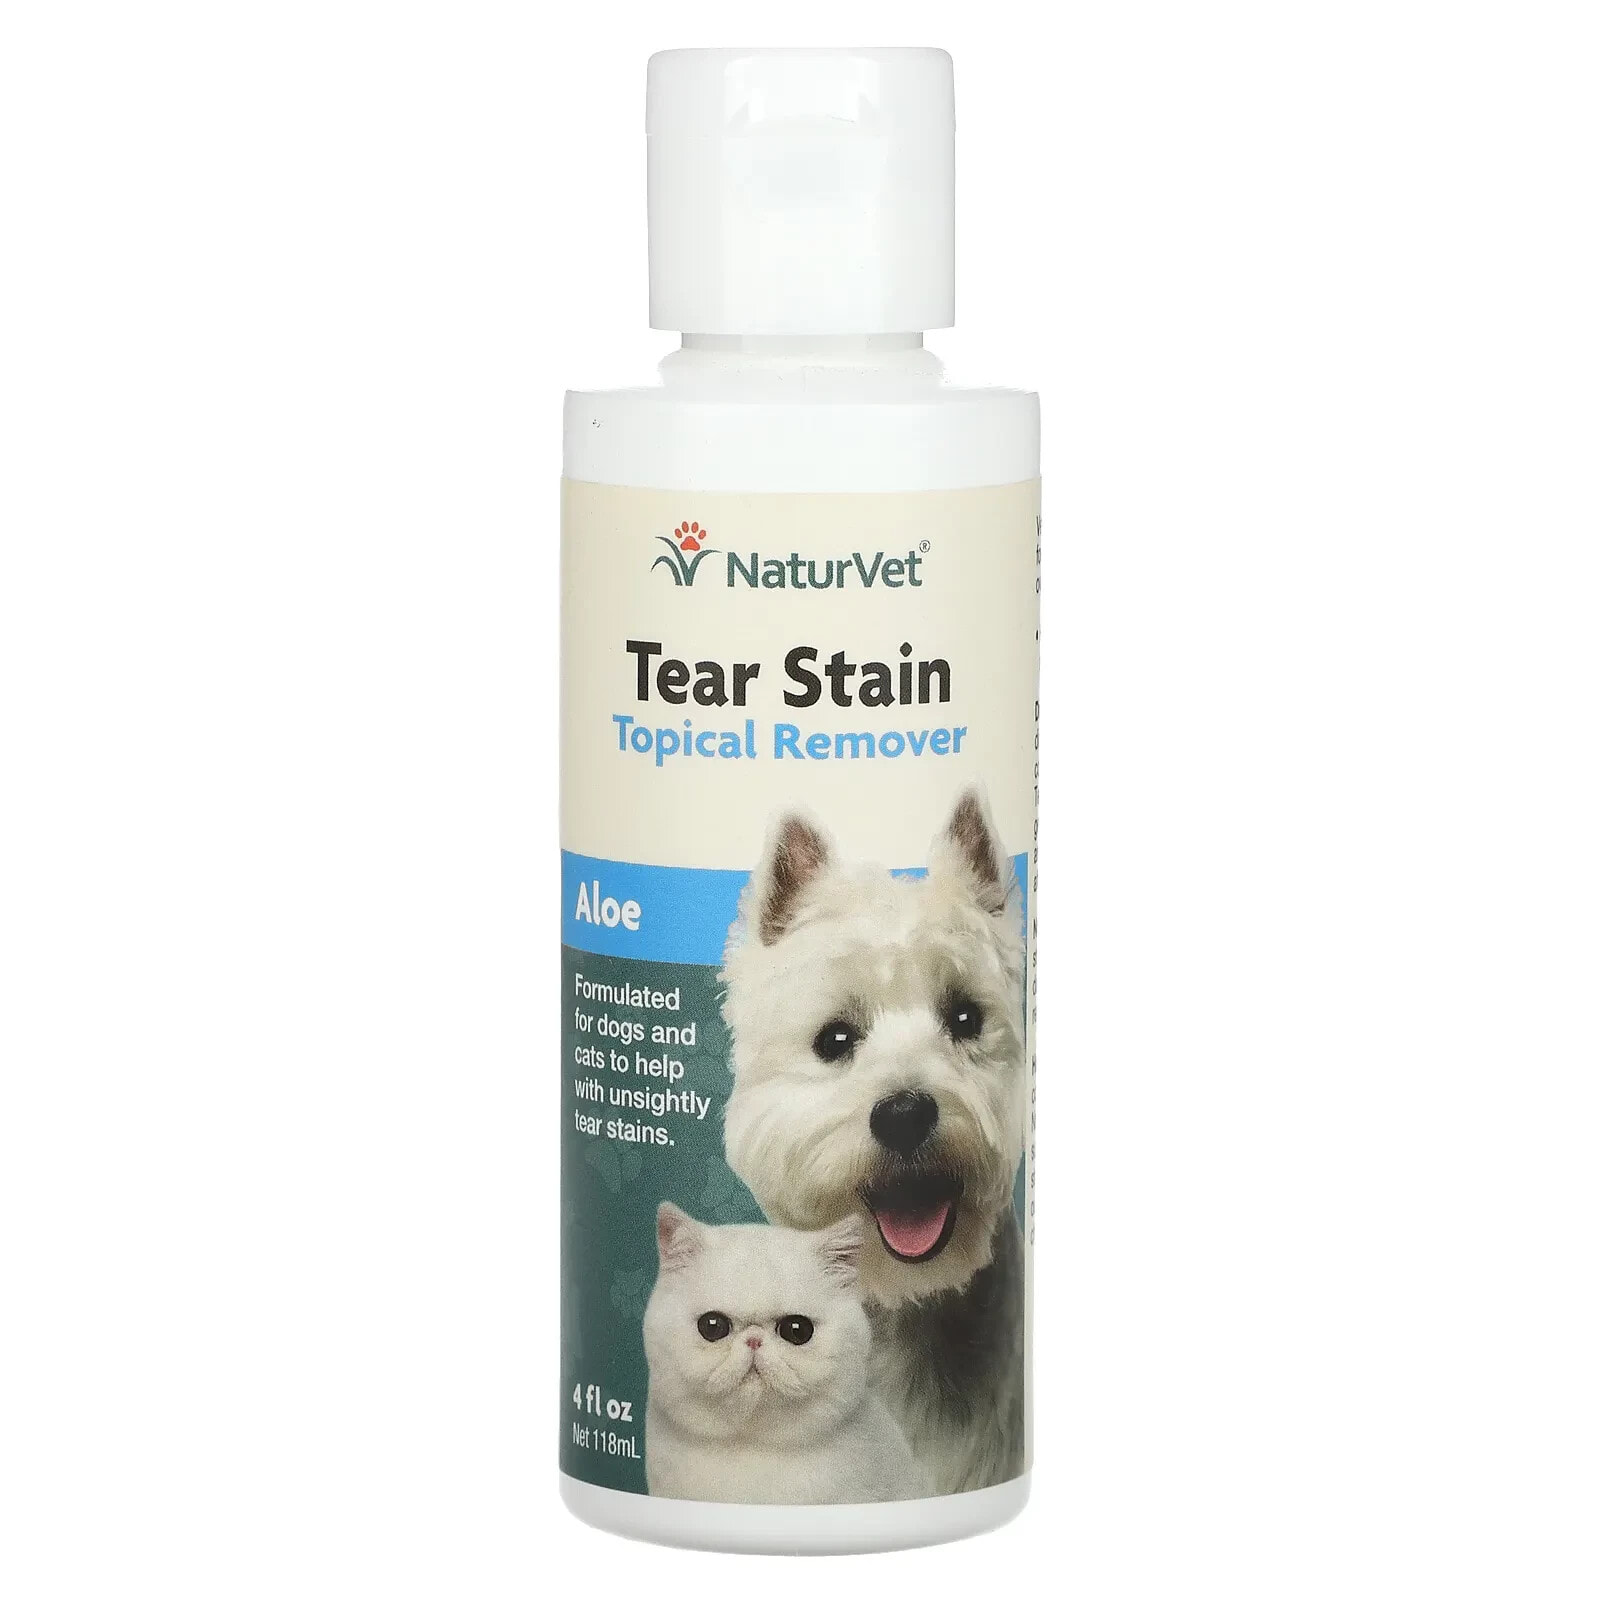 Tear Stain, Topical Remover + Aloe Vera, For Dogs & Cats, 4 fl oz (118 ml)